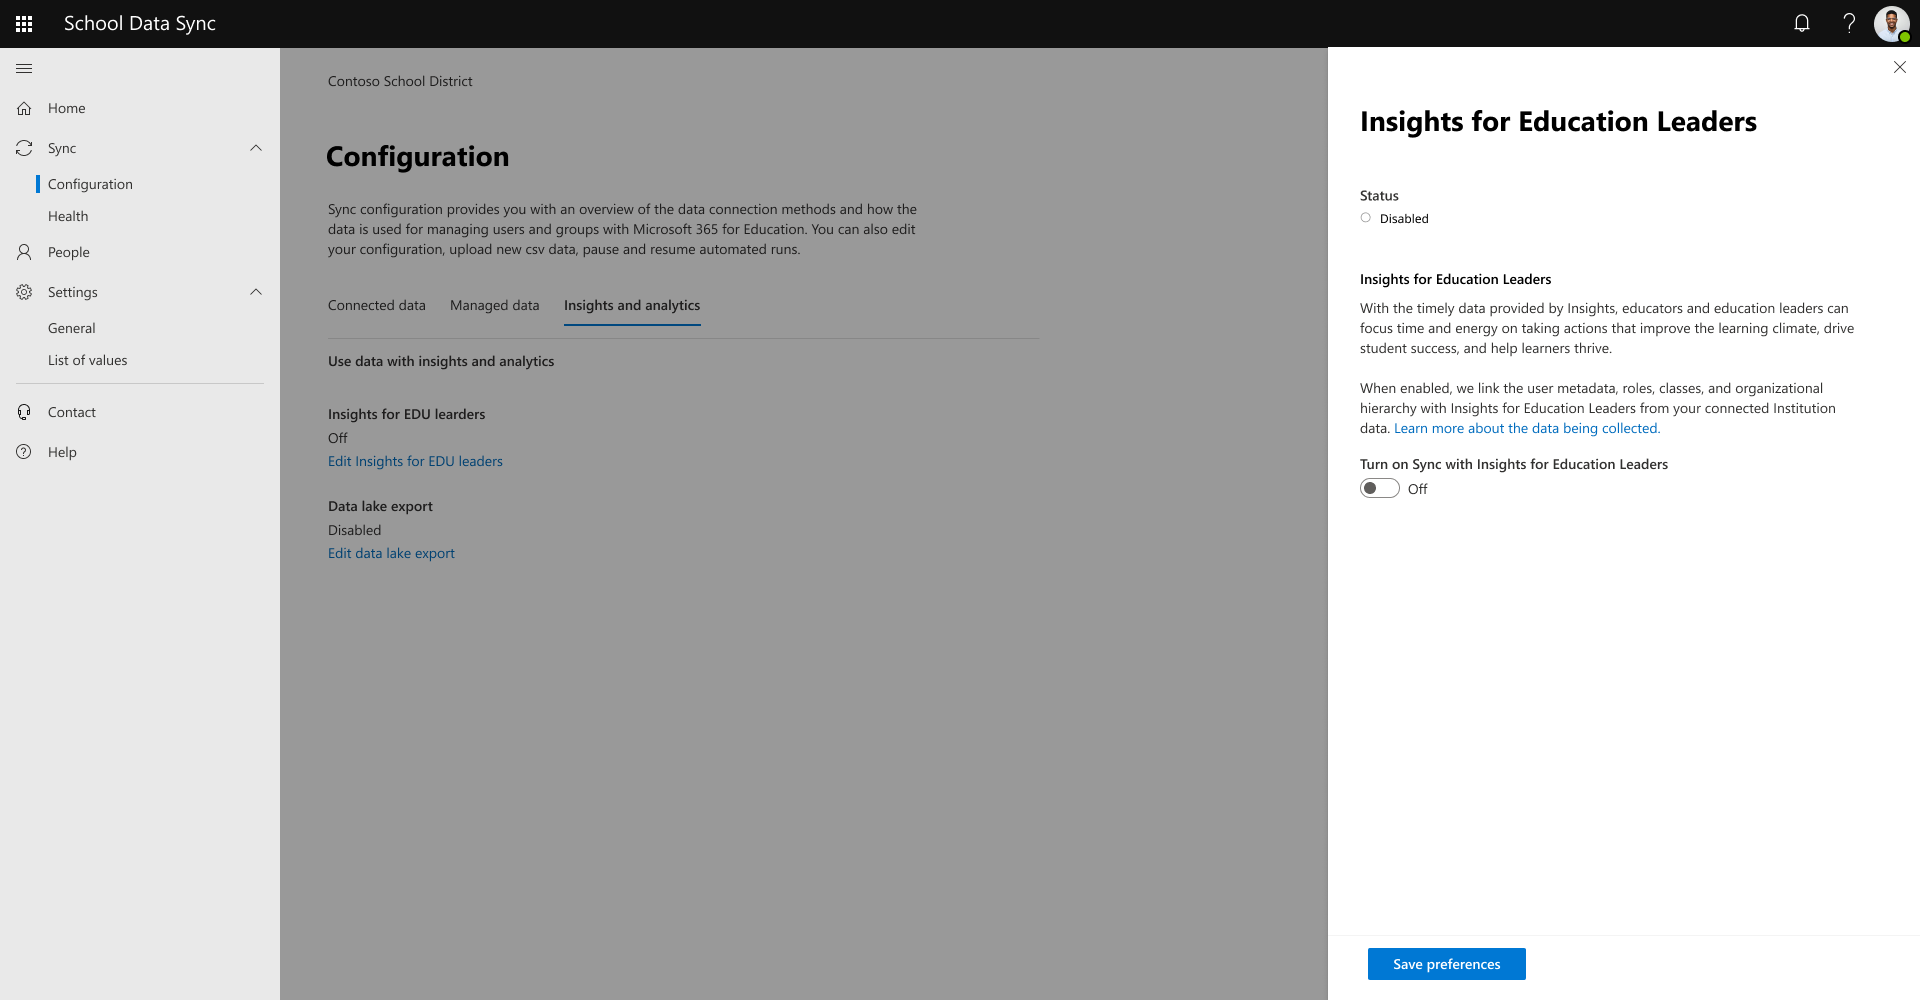 Screenshots shows fly-out panel for Sync to Insights for Education Leaders.